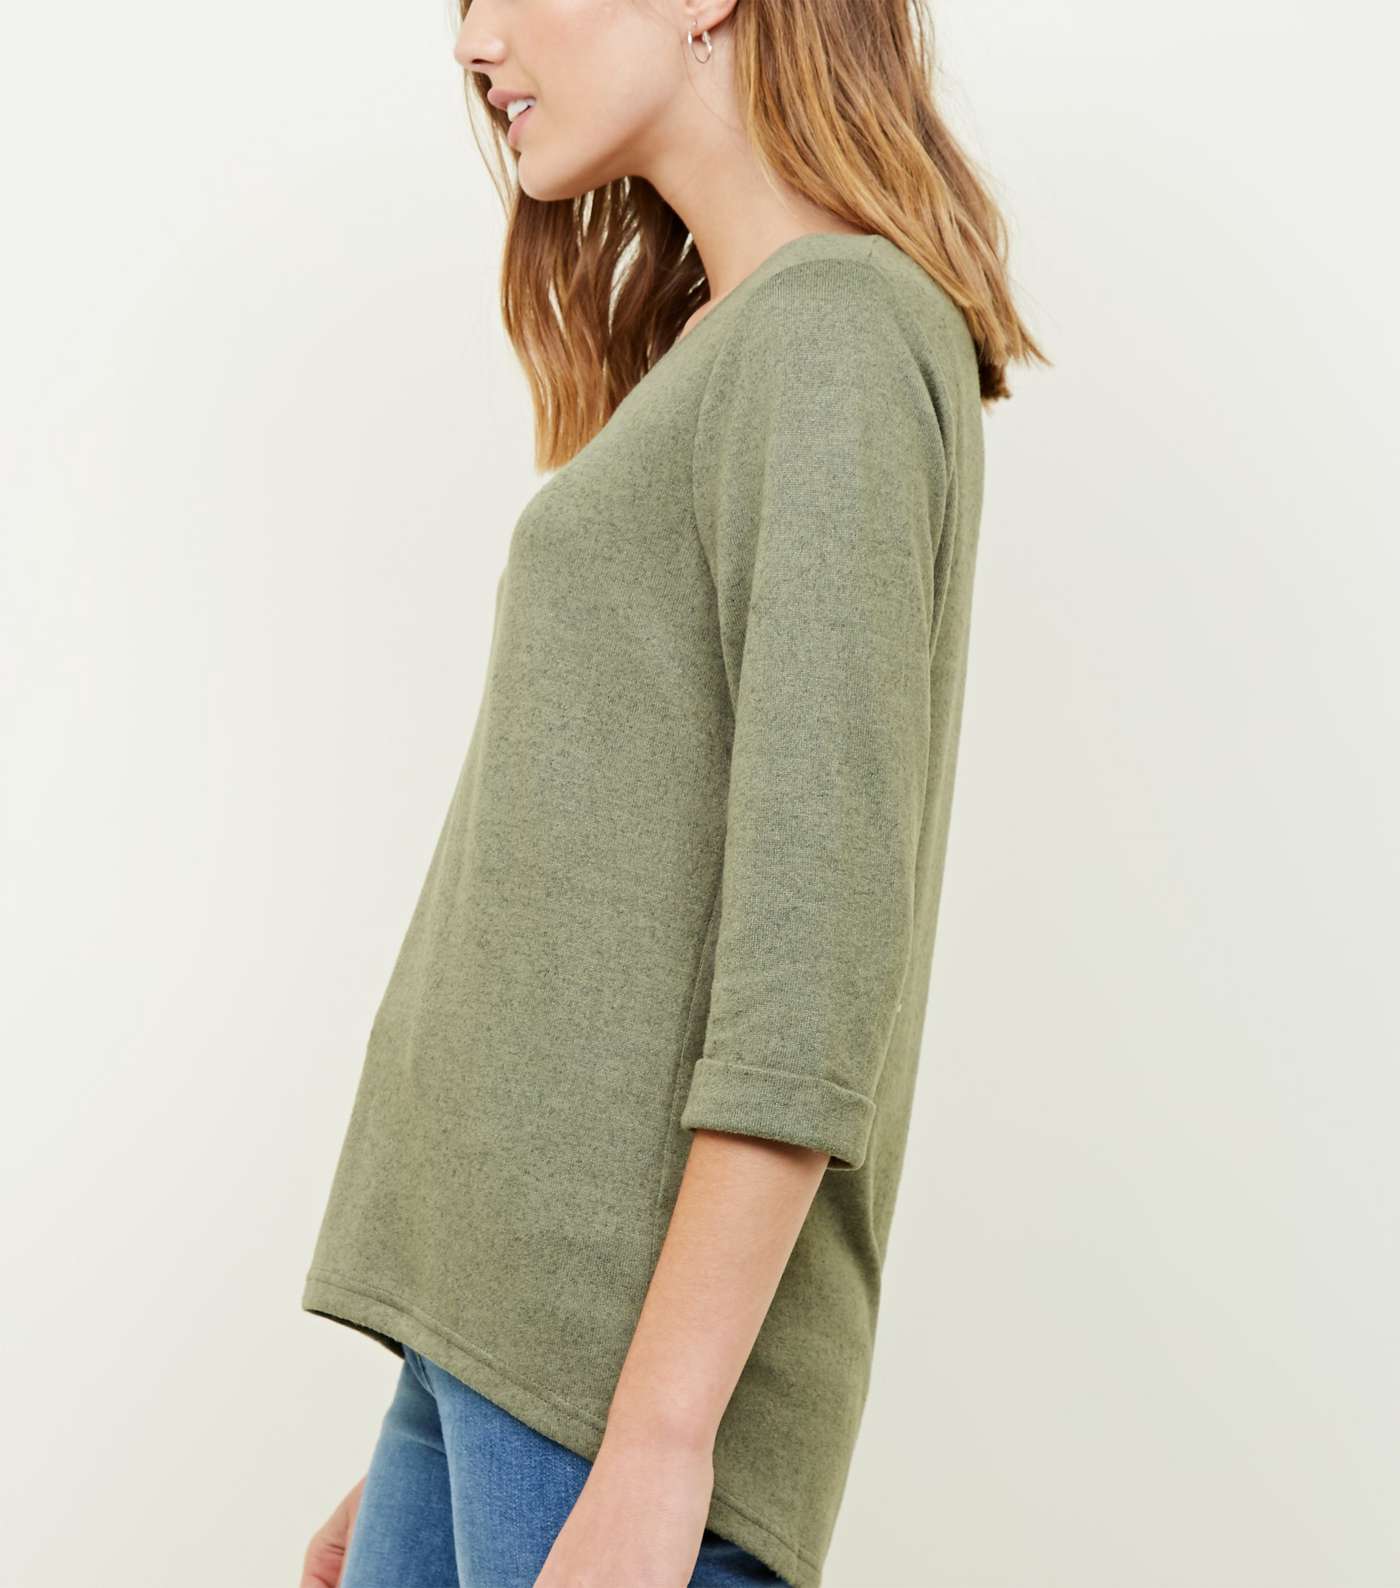 Olive Green 3/4 Sleeve Fine Knit Top Image 3